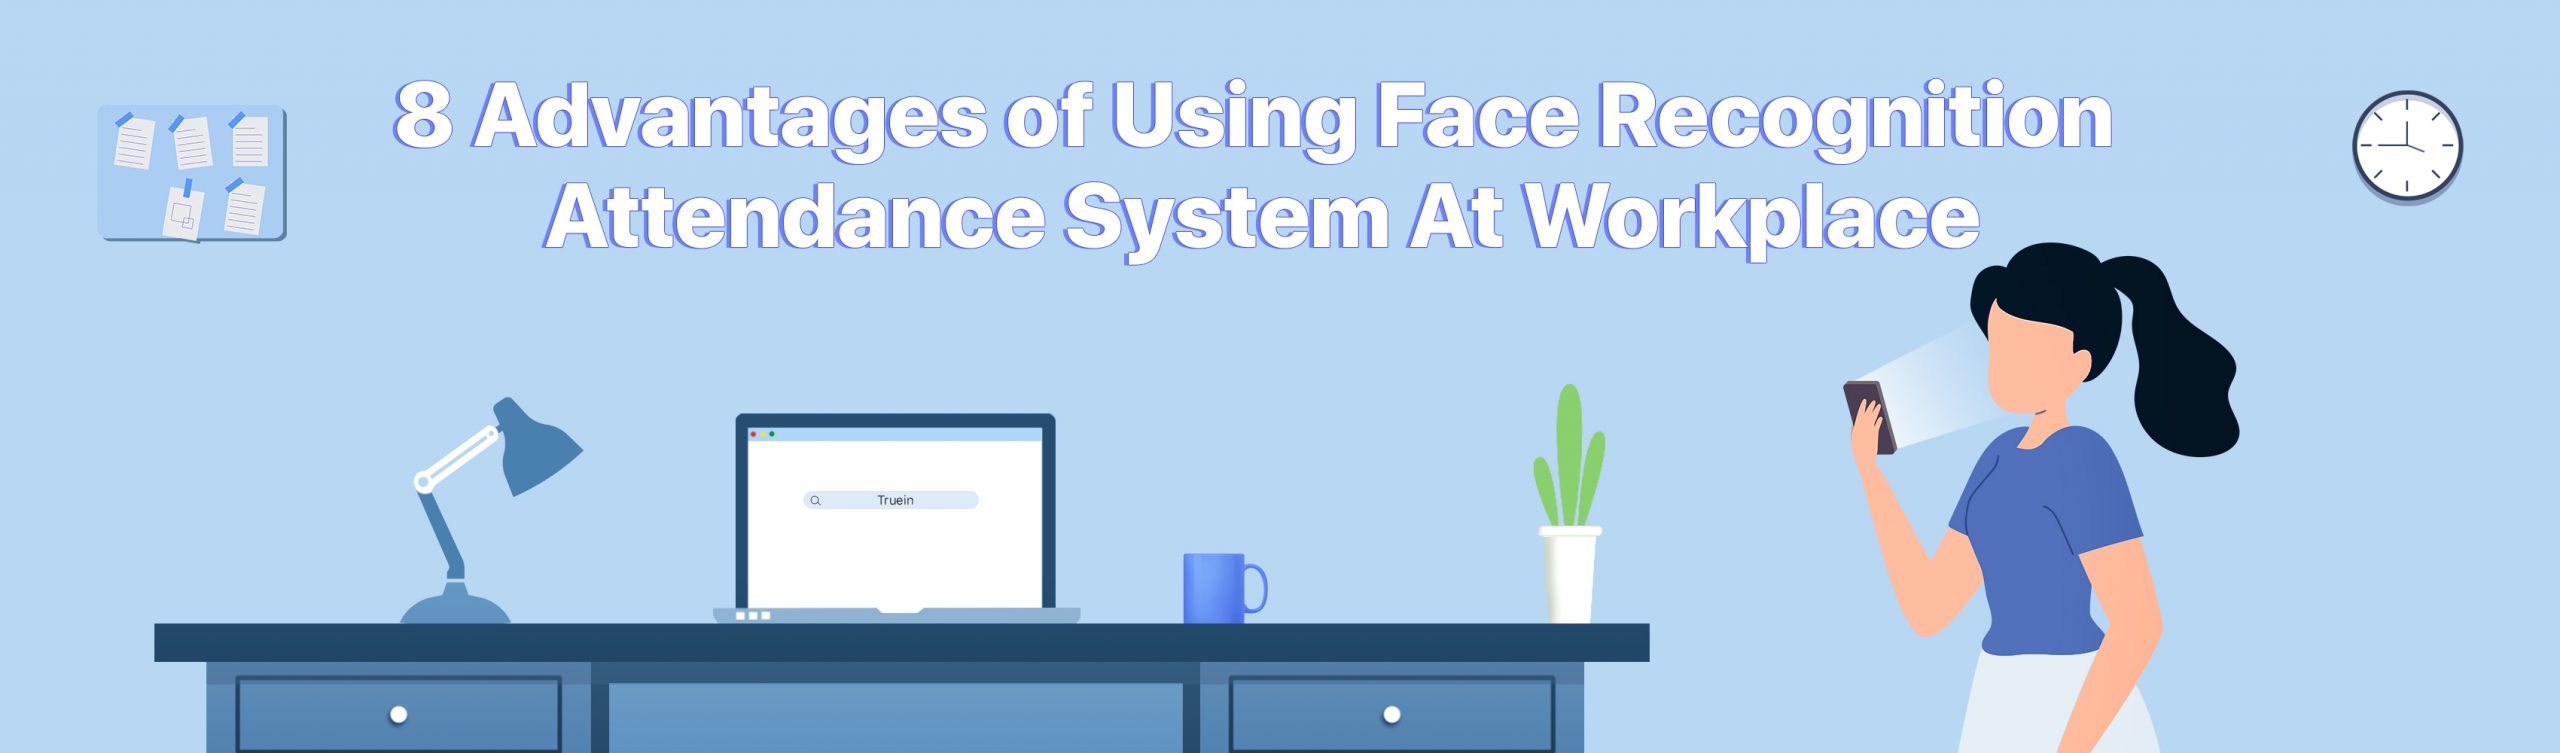 8 Advantages of Using Face Recognition Attendance System At Workplace